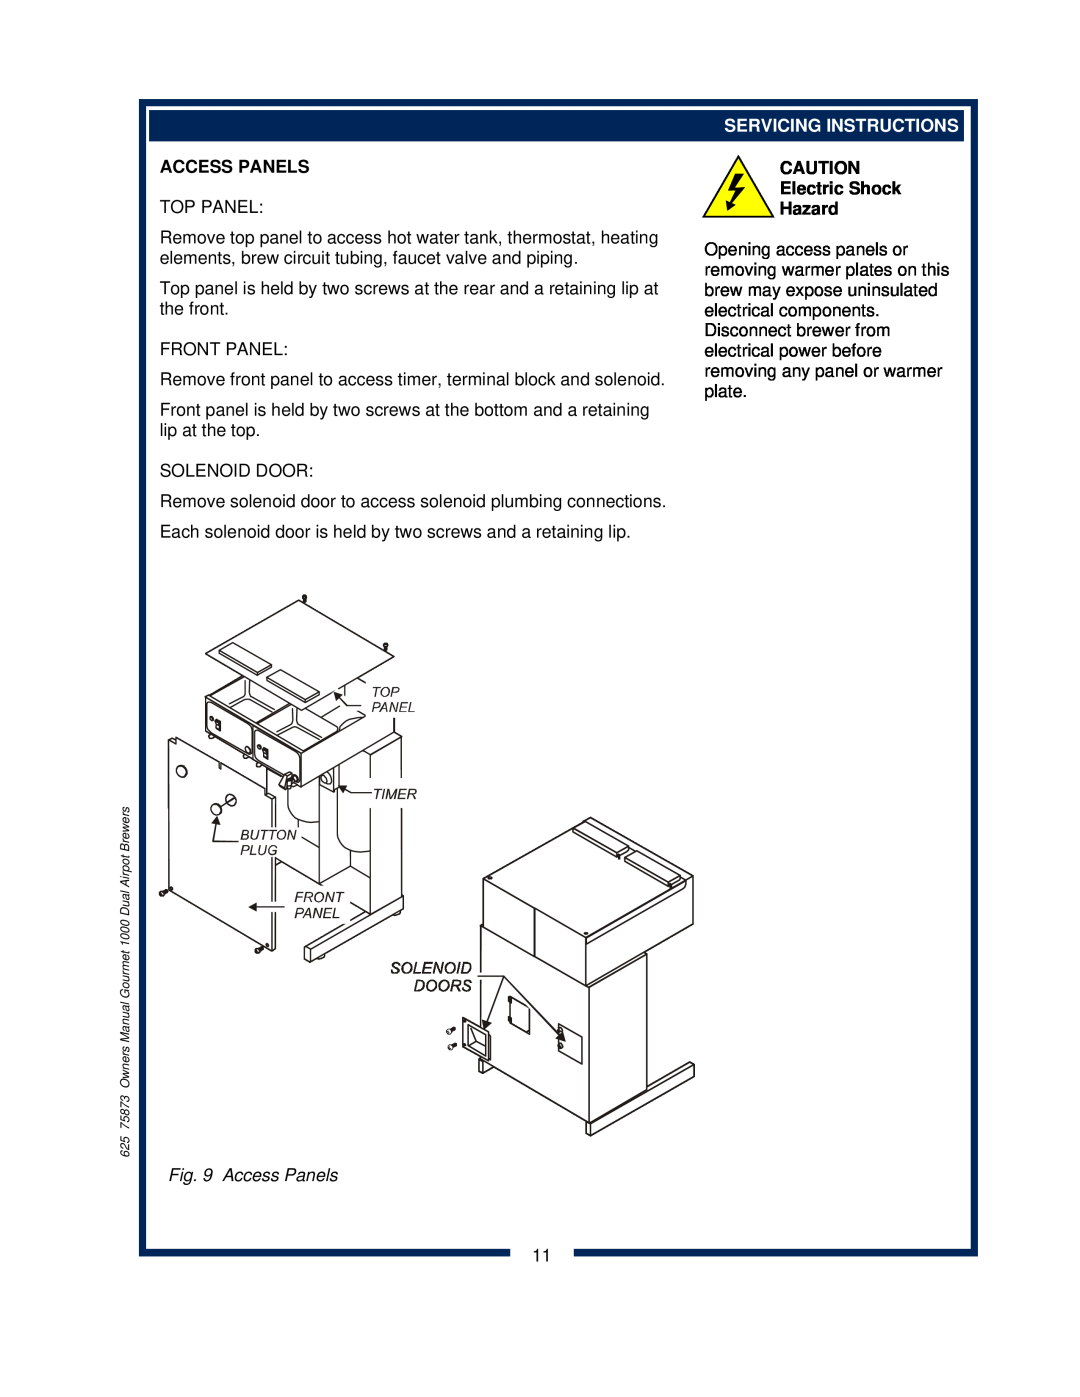 Bloomfield 8792 owner manual Access Panels, Servicing Instructions, Electric Shock Hazard 